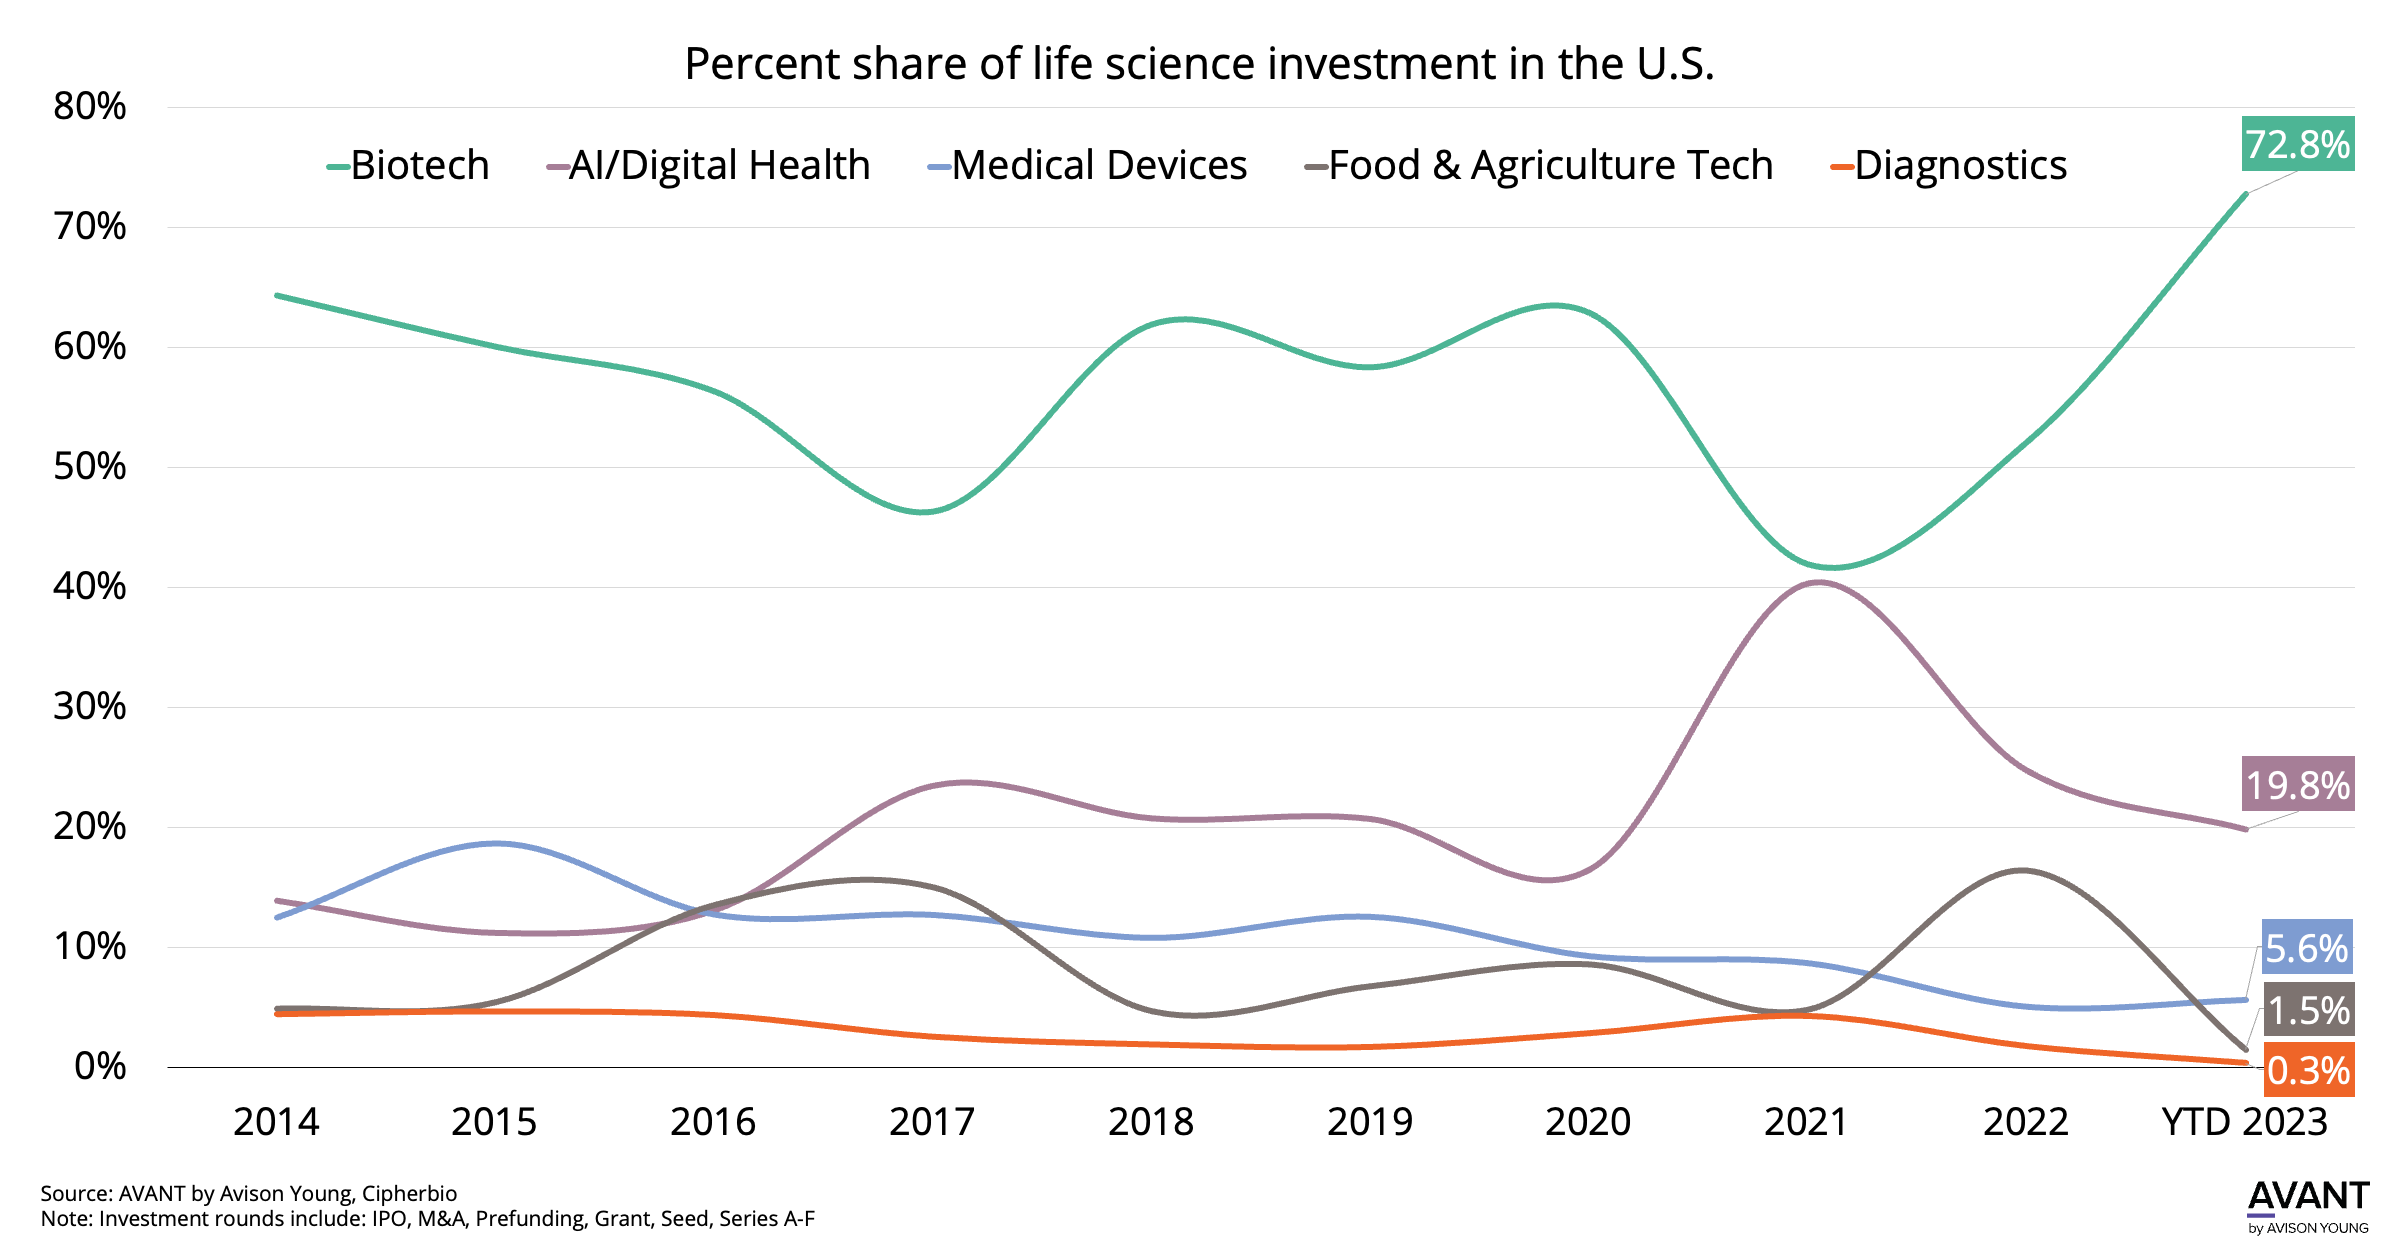 Percent share of life science investment in the U.S. for the following categories Biotech, Al/Digital Health, Medical Devices, Food & Agriculture Tech, Diagnostics from 2014 to 2023 year-to-date